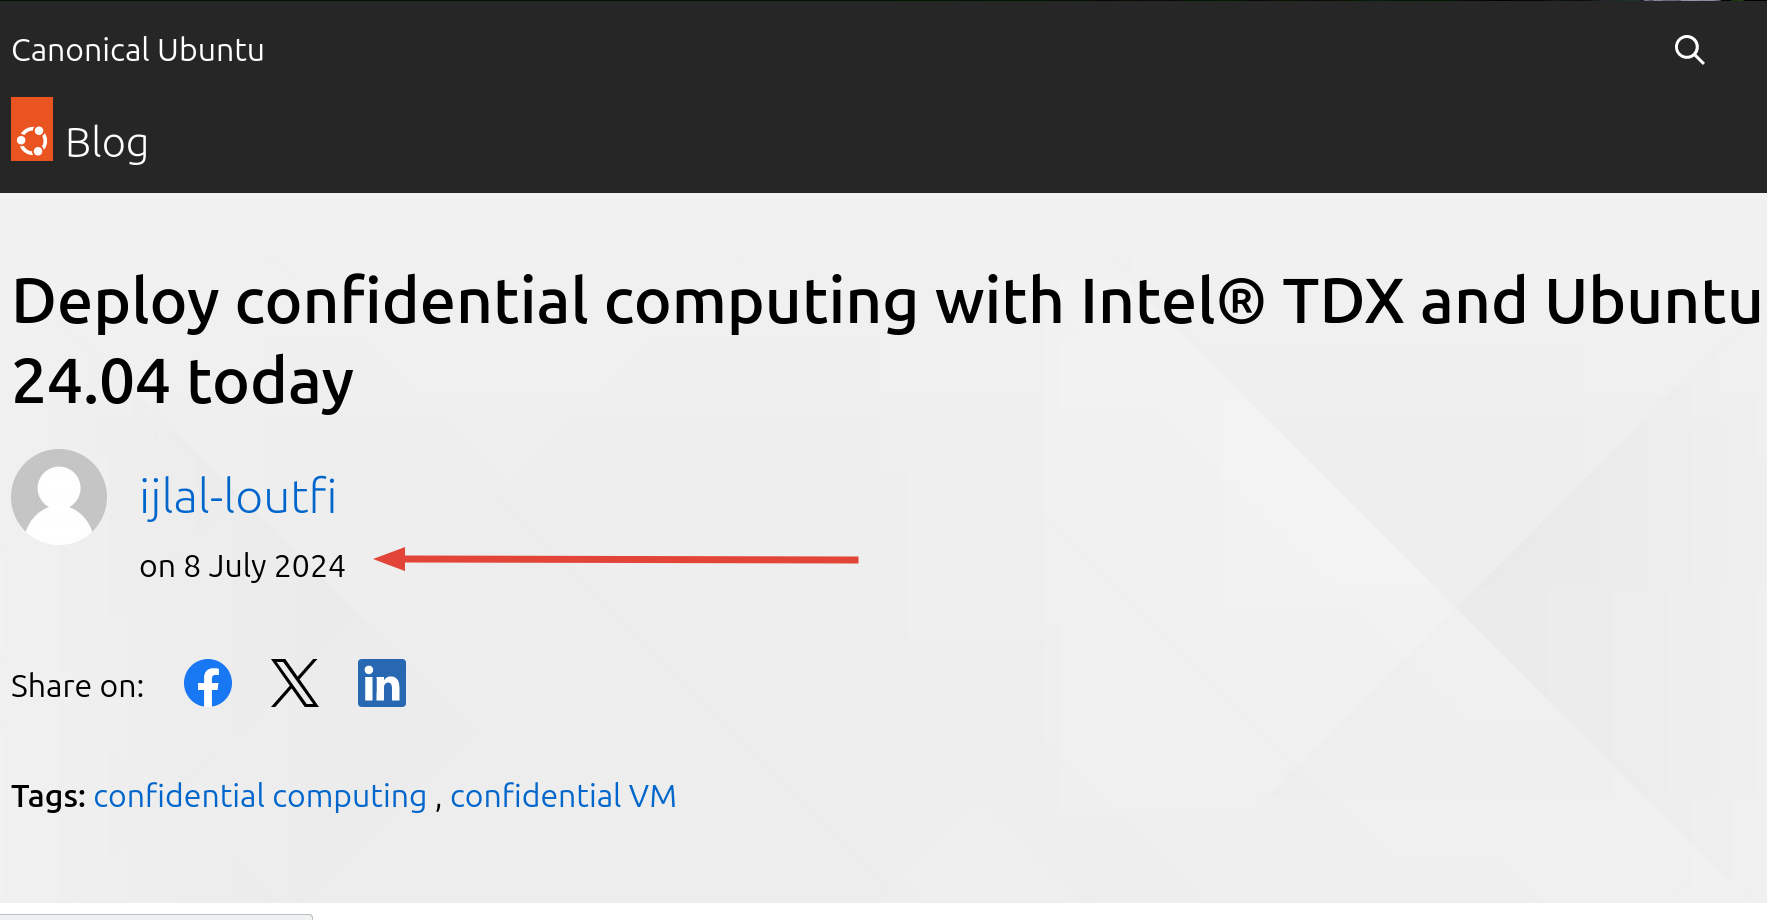 Deploy confidential computing with Intel® TDX and Ubuntu 24.04 today